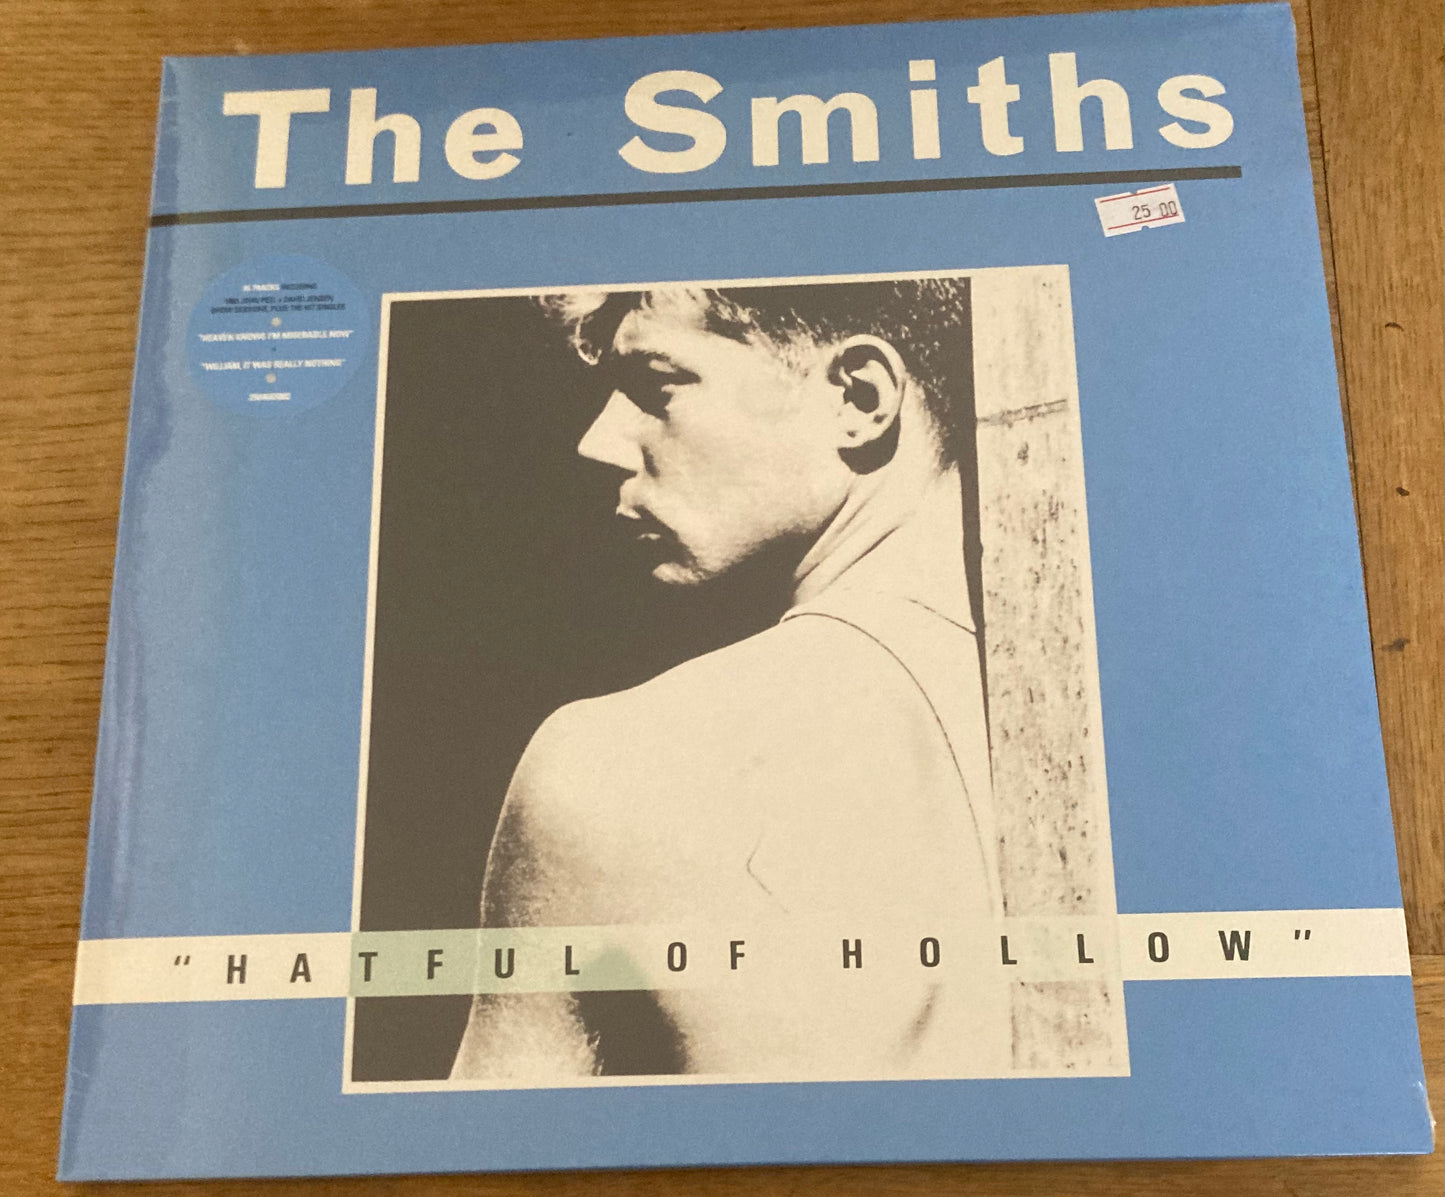 The front of 'the Smiths - Hatfull of Hollow' on vinyl